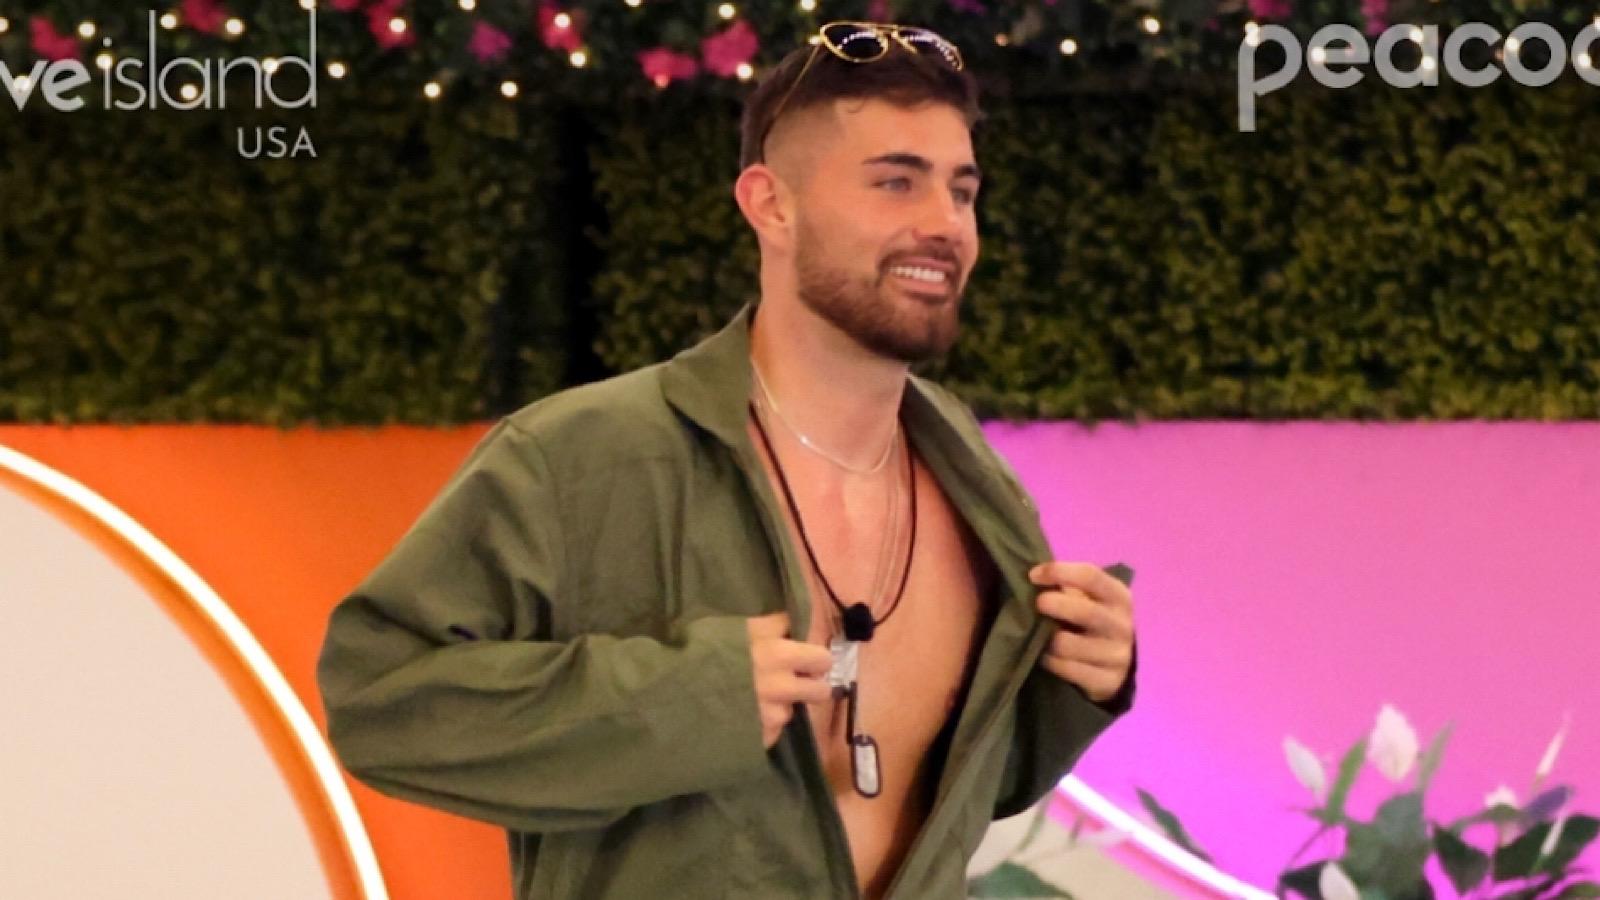 Love Island USA fans notice a big difference in Scott compared to the